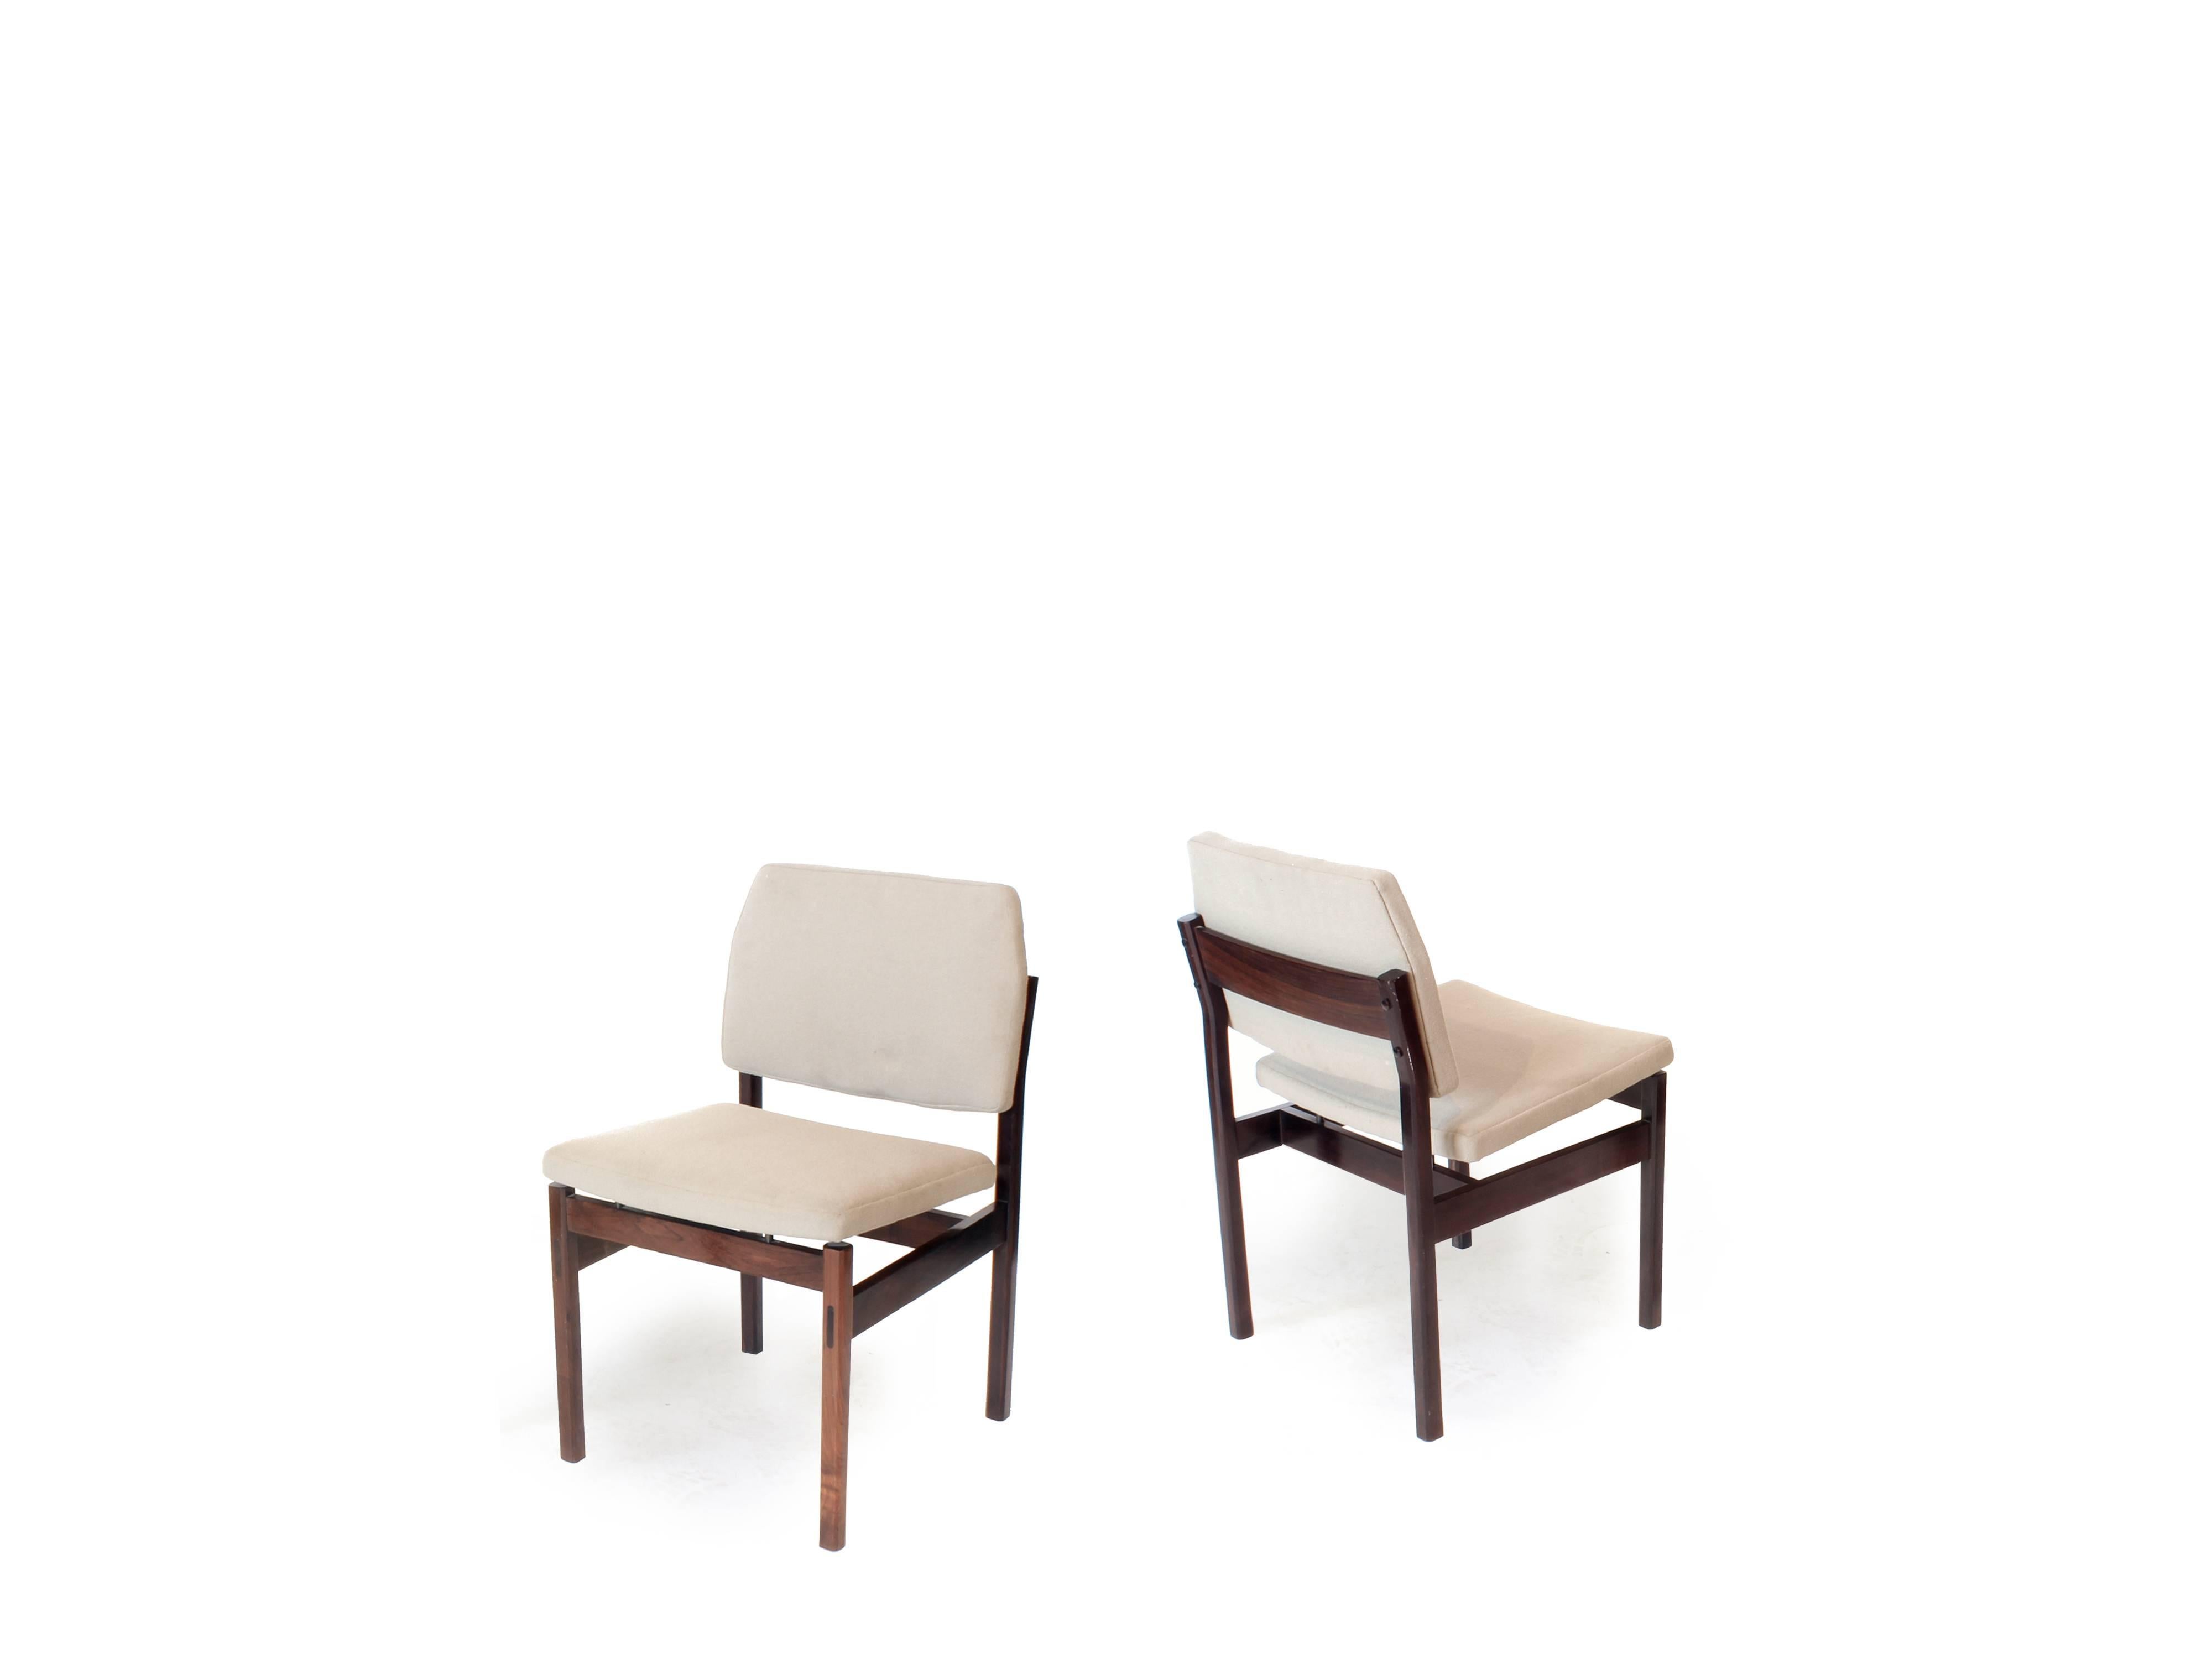 Mid-Century Modern Arredamento Midcentury Chair in Brazilian Wood with Linen Upholstery, 60s